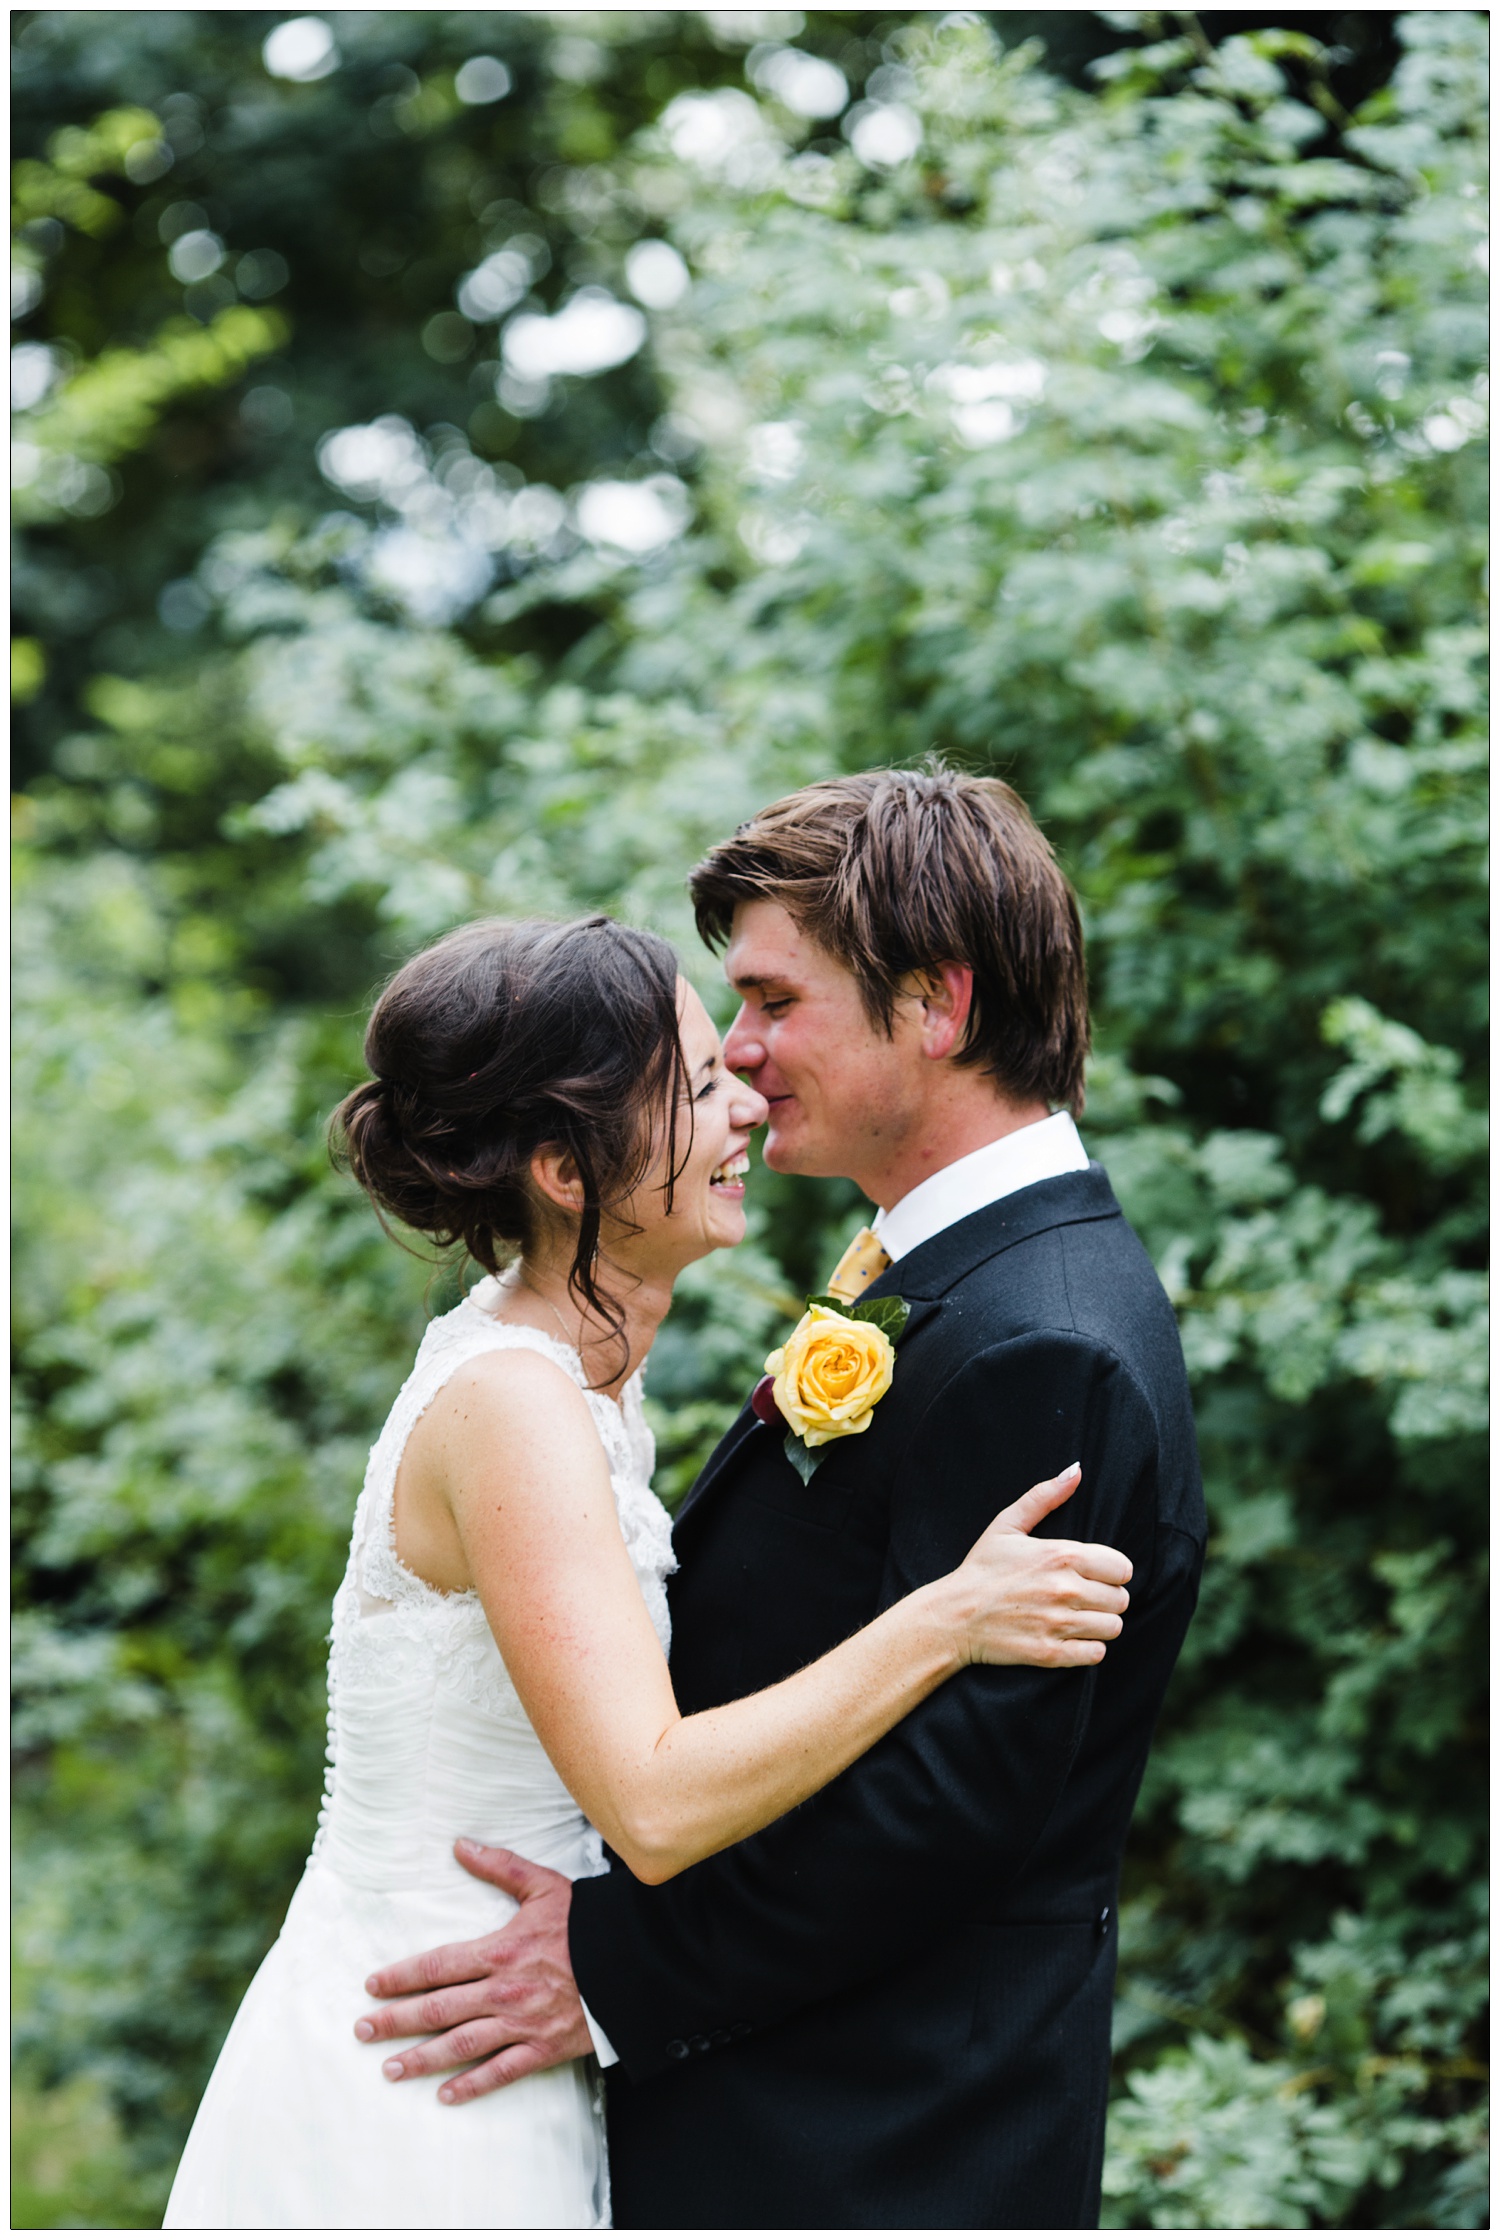 A relaxed bride and groom portrait.